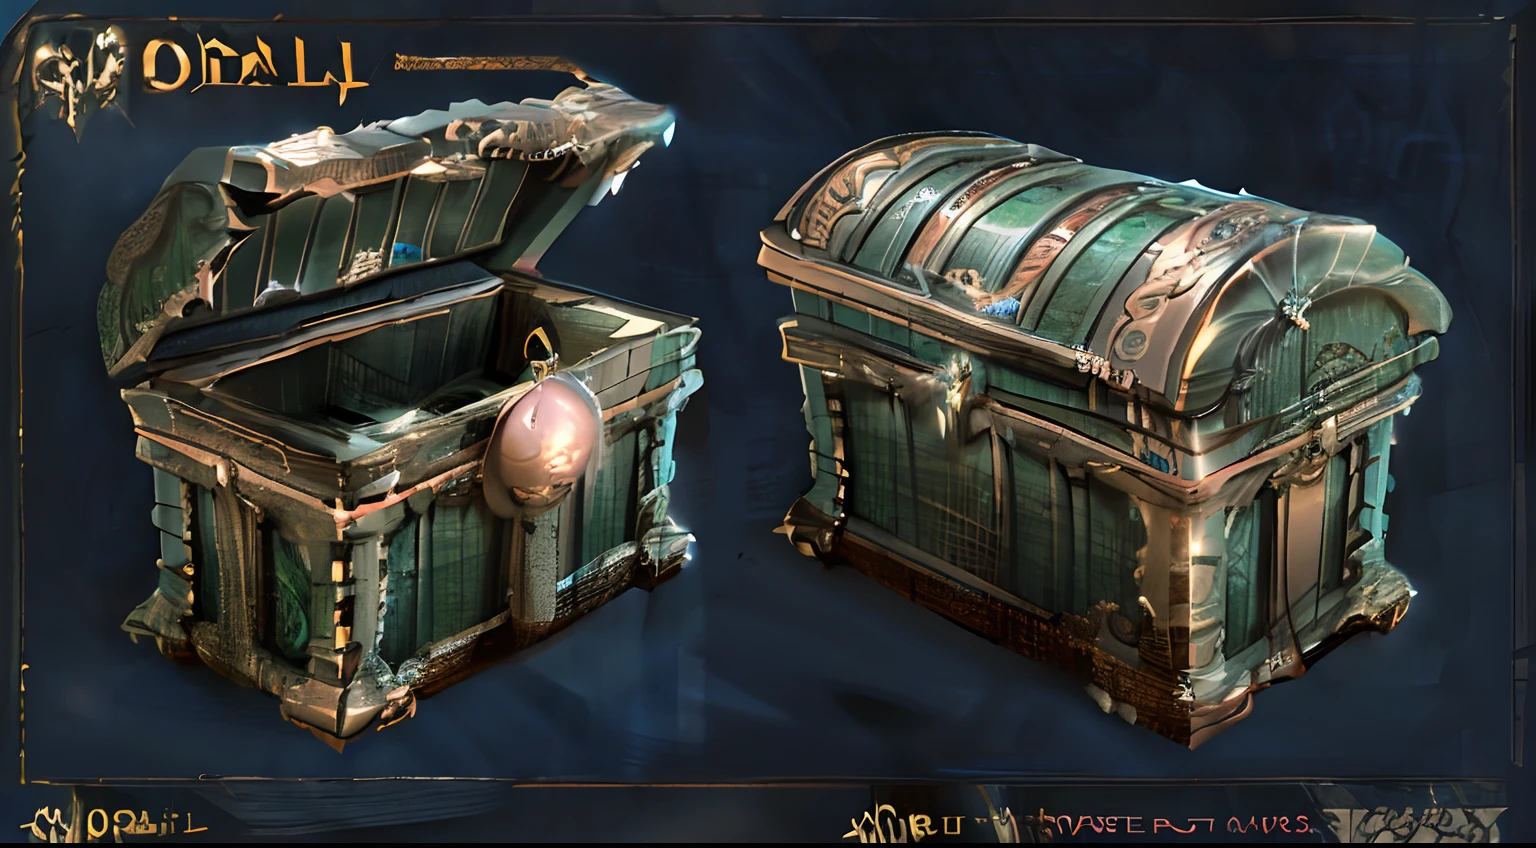 There are two chests，It has a gold and green design on it